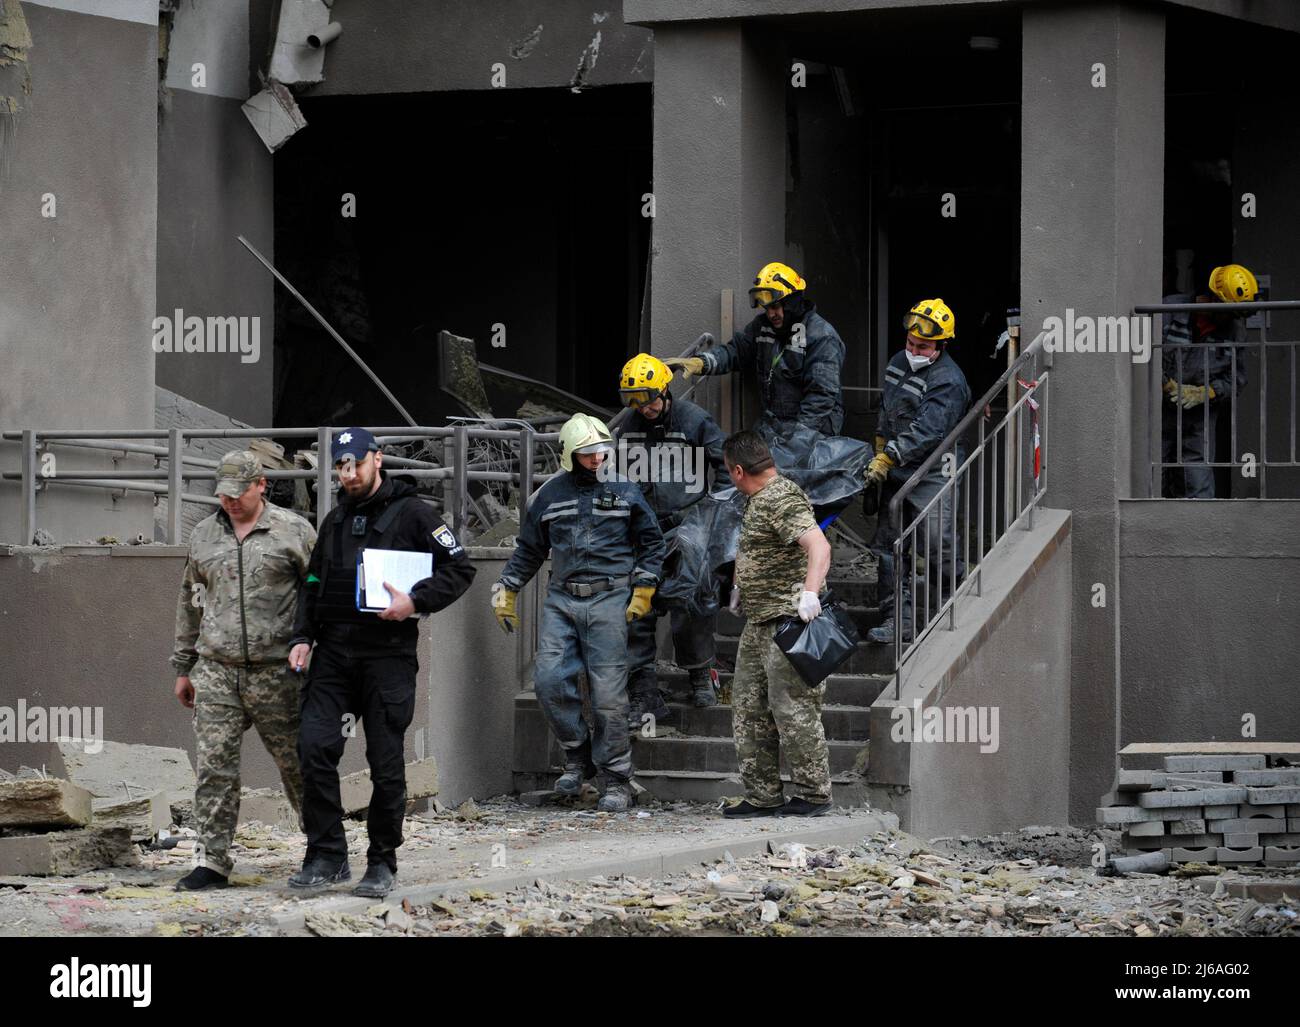 Kyiv, Ukraine. 29th Apr, 2022. April 29, 2022, Kyiv, Ukraine: Rescuers carry the body of a dead woman who died during a Russian army missile strike. On April 28 2022, two Russian missiles hit Kyiv. One of them hit a 25-storey residential building. It was reported about 10 victims, of which four were hospitalized and on the next day, the mayor of Kyiv, Vitali Klitschko, said that as a result of a Russian missile hitting a high-rise building, one person died. At that moment, UN Secretary General AntÃ³nio Guterres was in the capital of Ukraine, holding talks with President Volodymyr Zelensky. (Cr Stock Photo